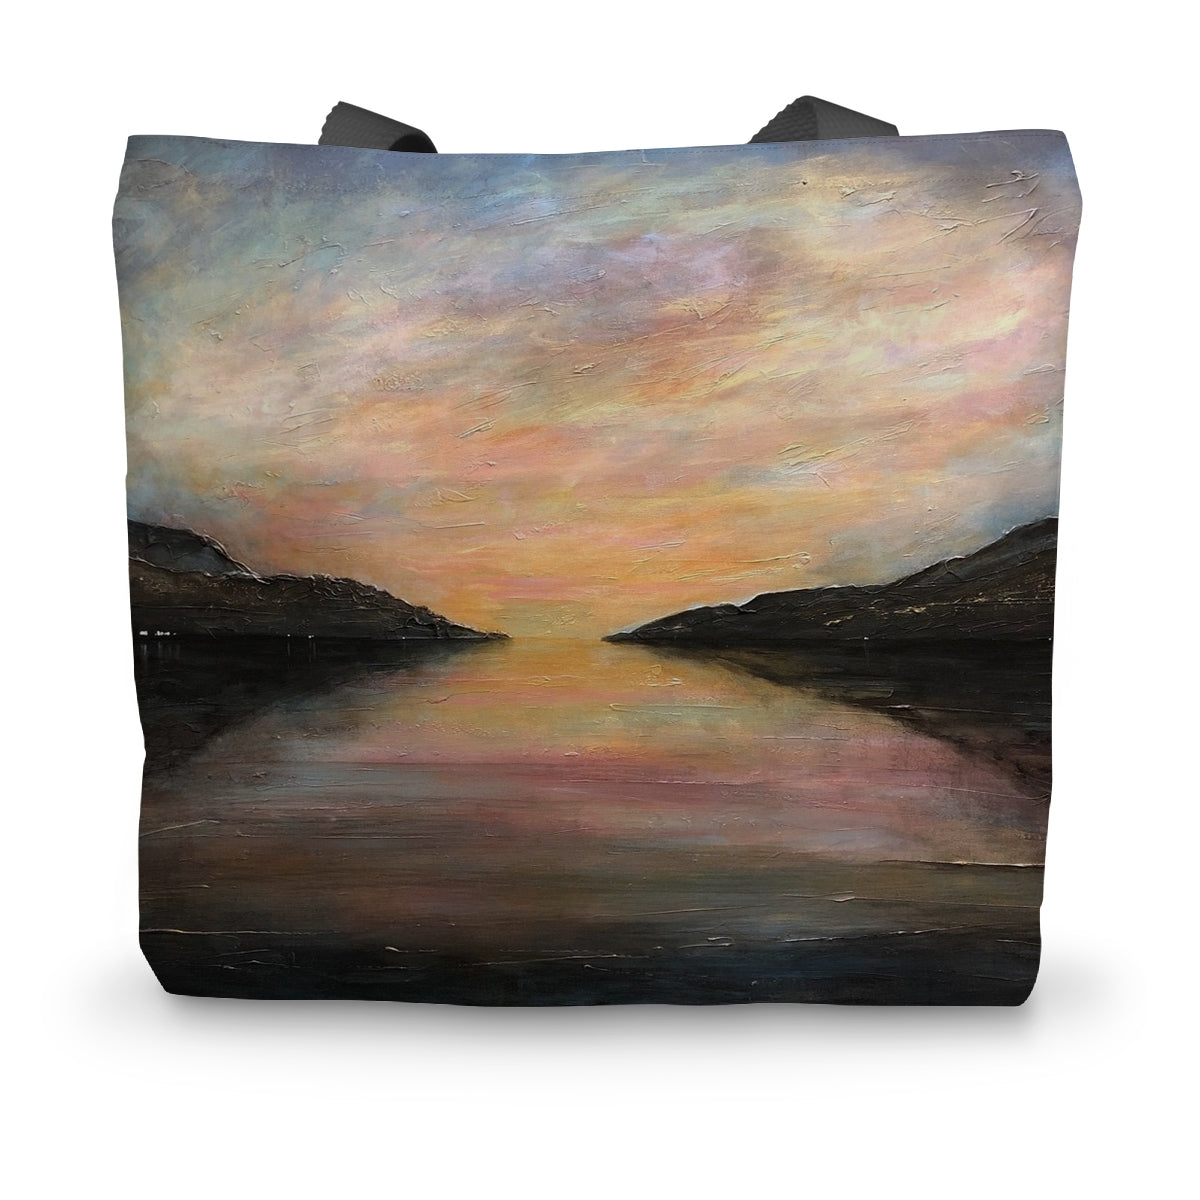 Loch Ness Glow Art Gifts Canvas Tote Bag